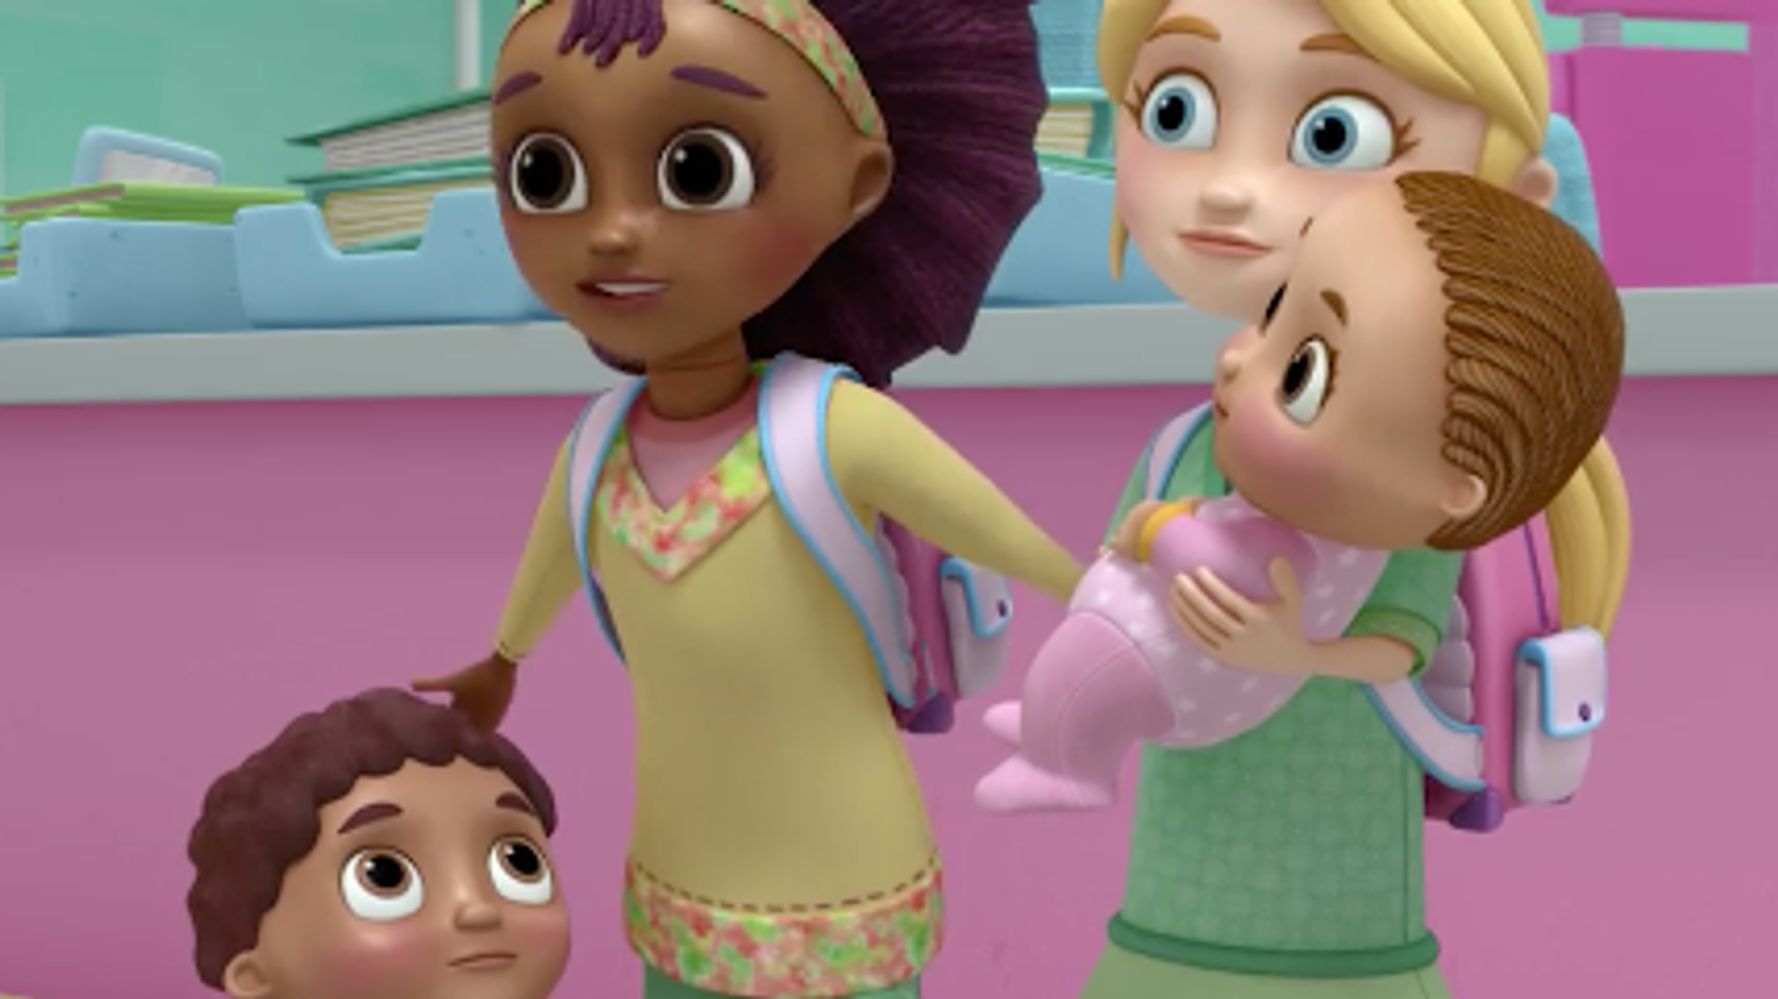 'Family' Group Slams 'Doc McStuffins' For Featuring A Two-Mom Family ...